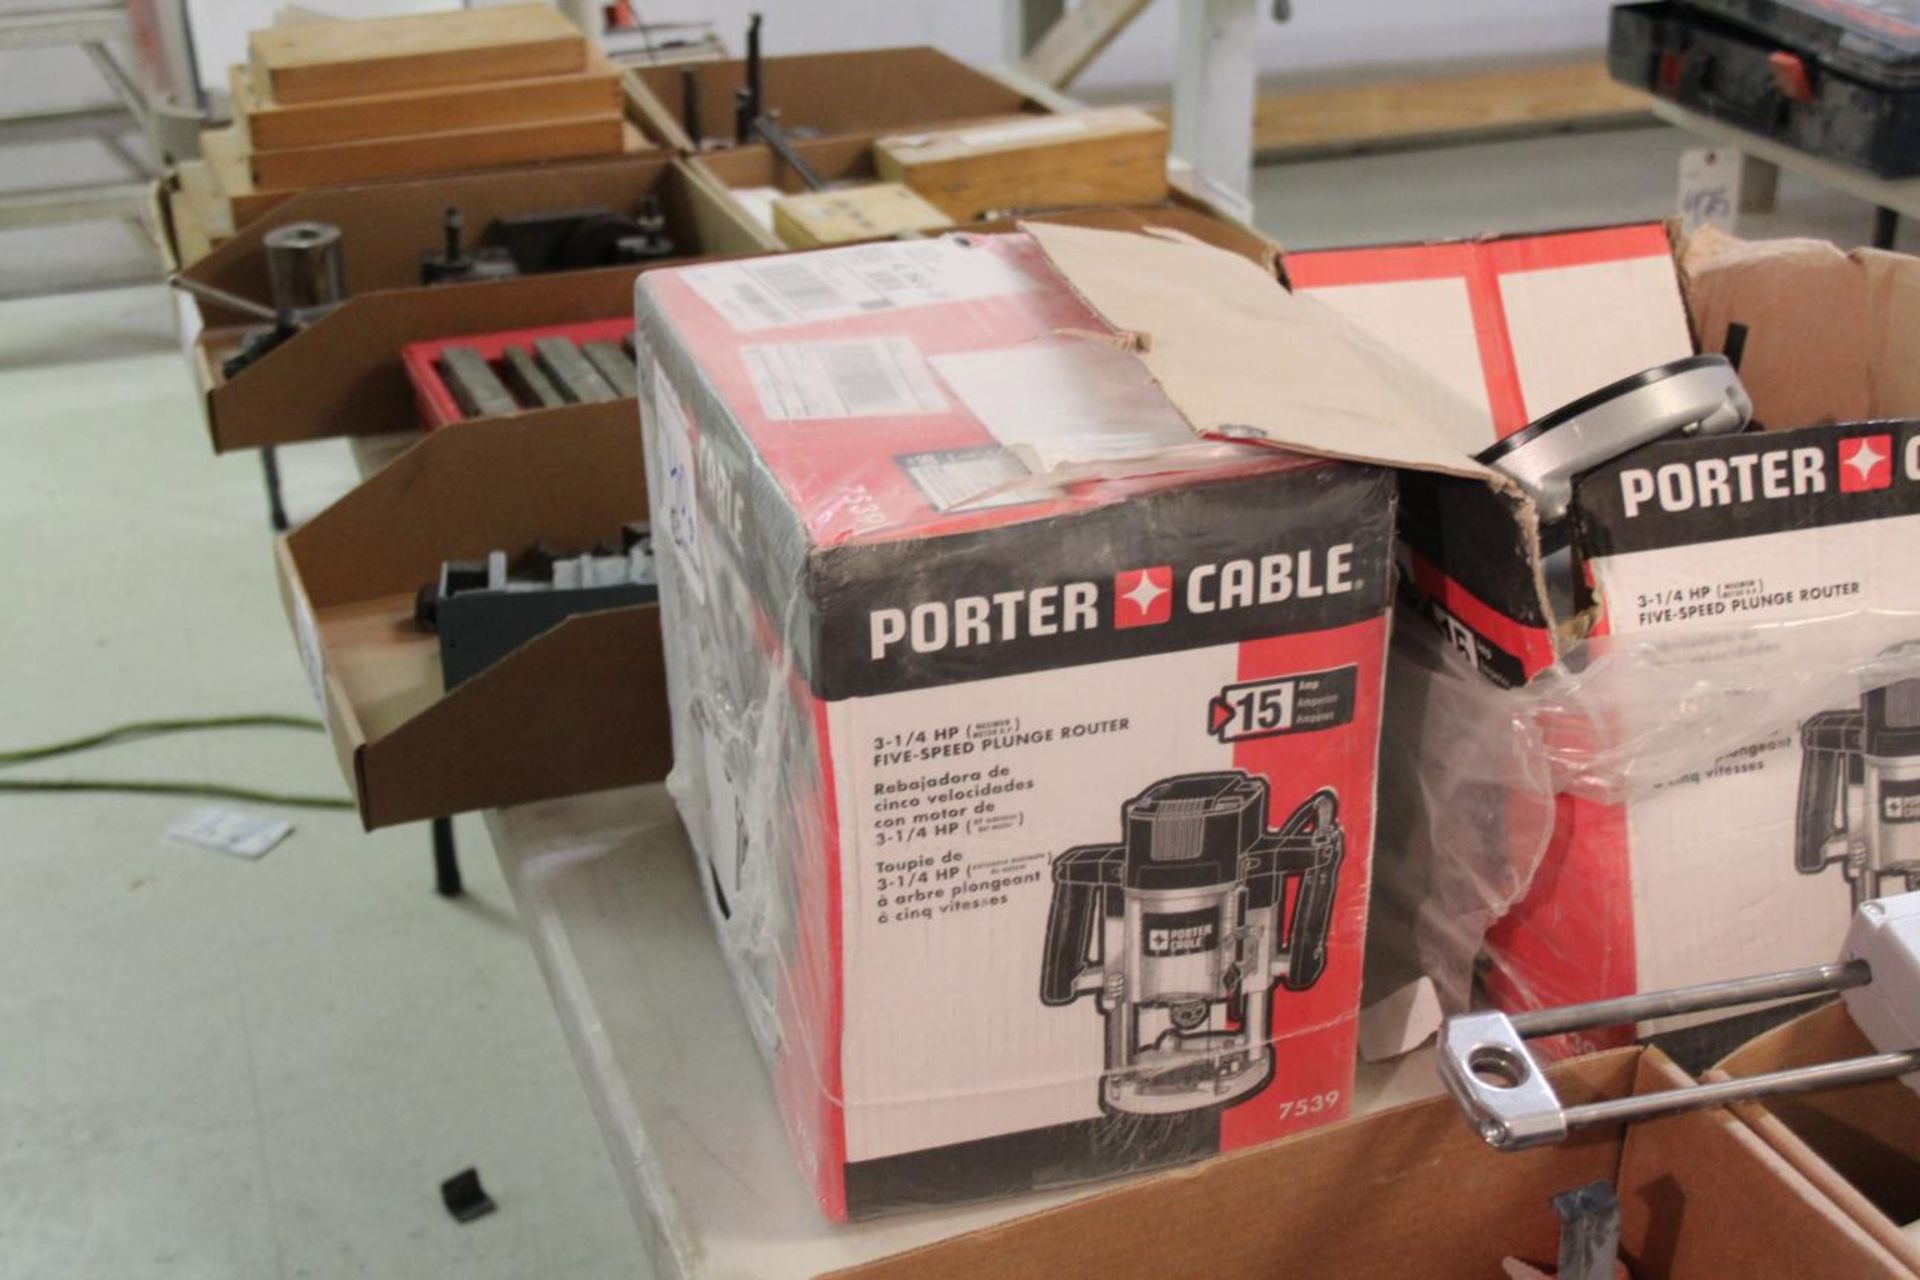 Porter Cable 7539 5 Speed Plunge Router, Sealed Box, 3 1/4 hp